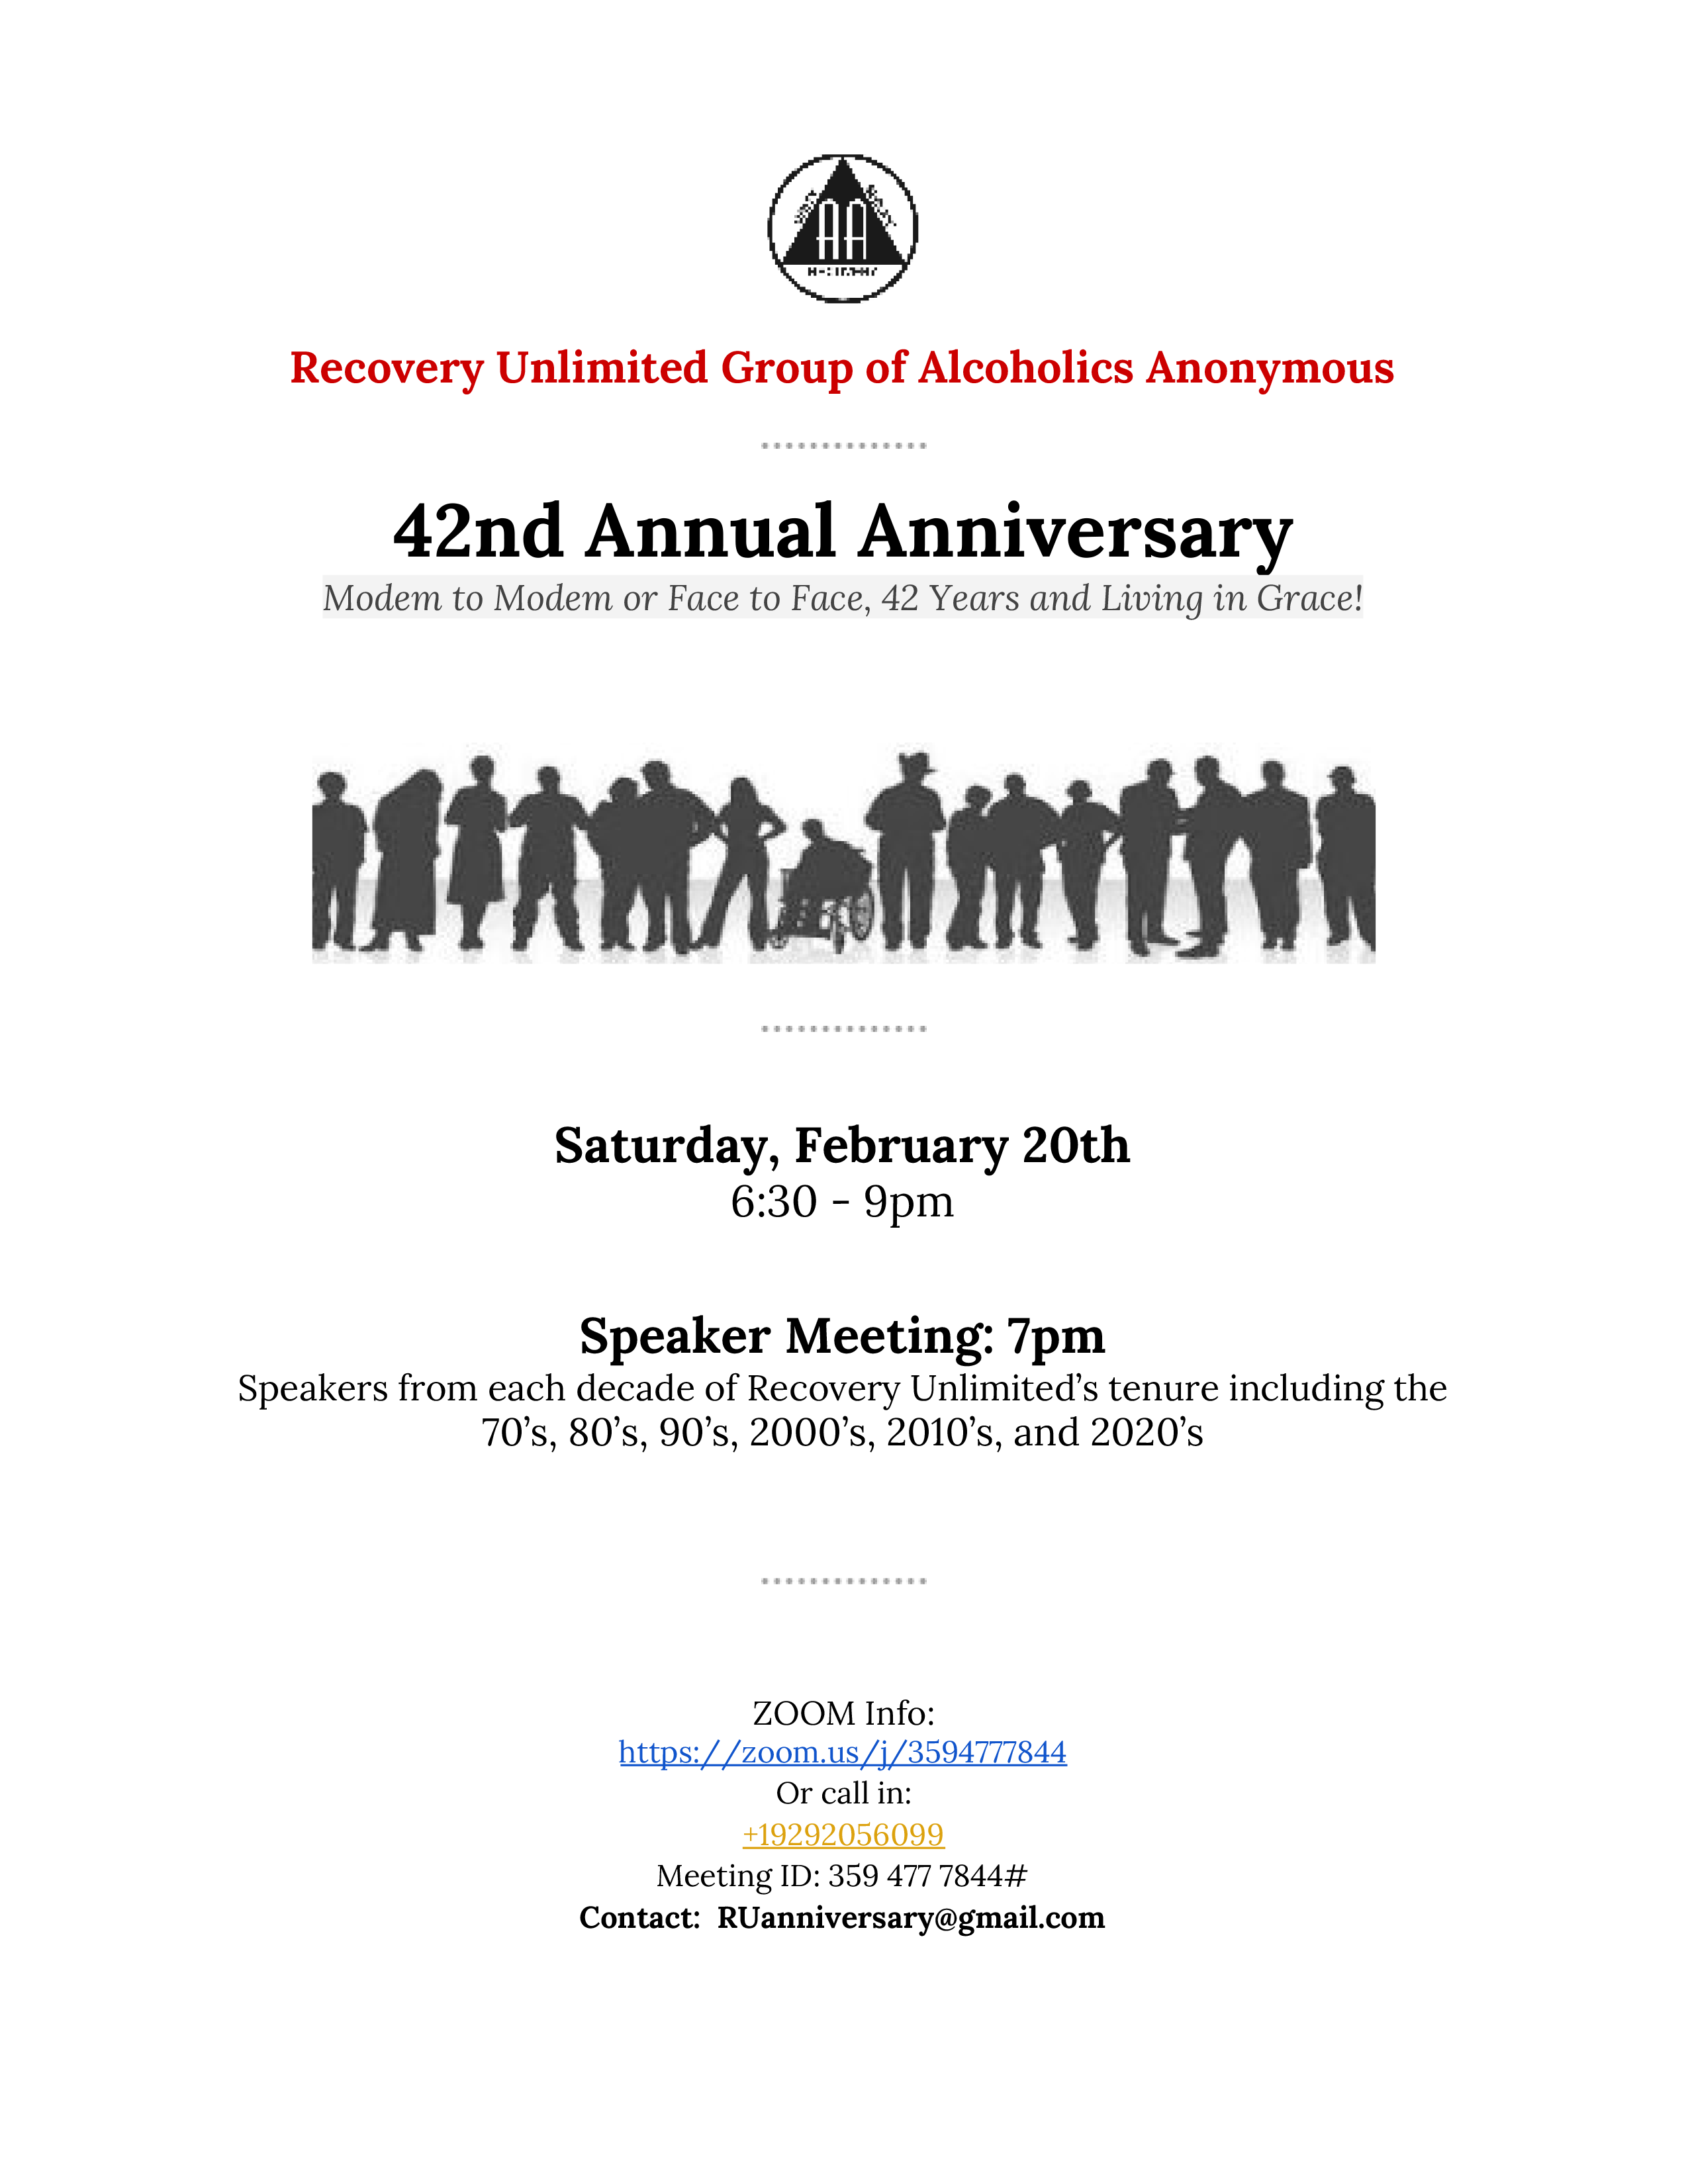 Recovery Unlimited 42nd Anniversary Flyer